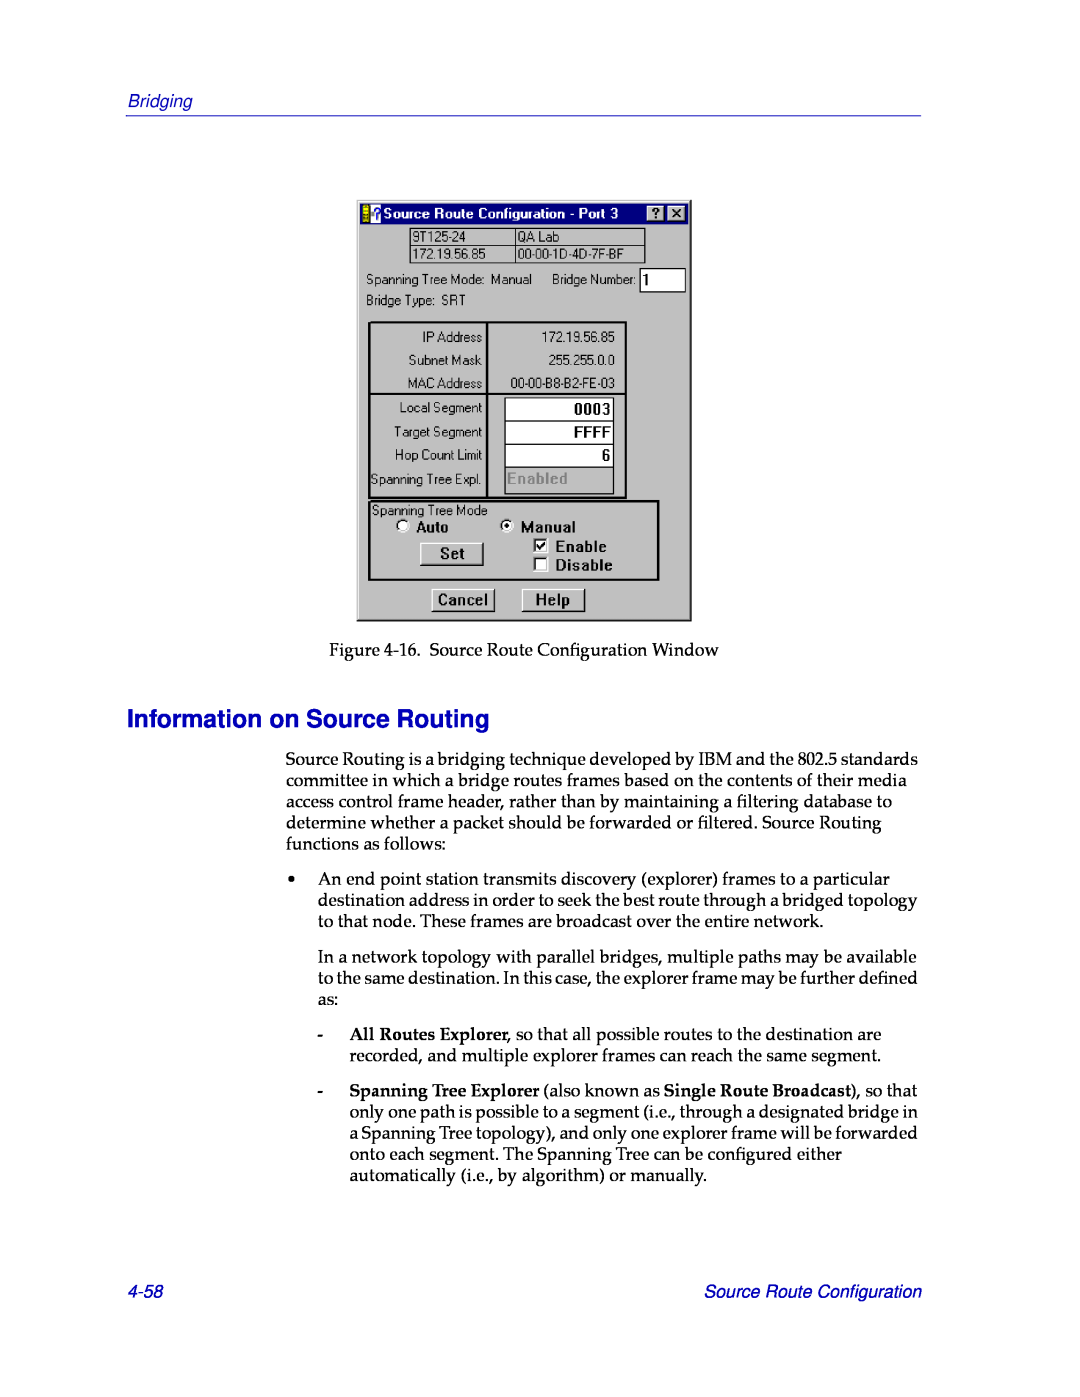 Cabletron Systems CSX400, CSX200 manual Information on Source Routing, 4-58, Bridging, Source Route Conﬁguration 